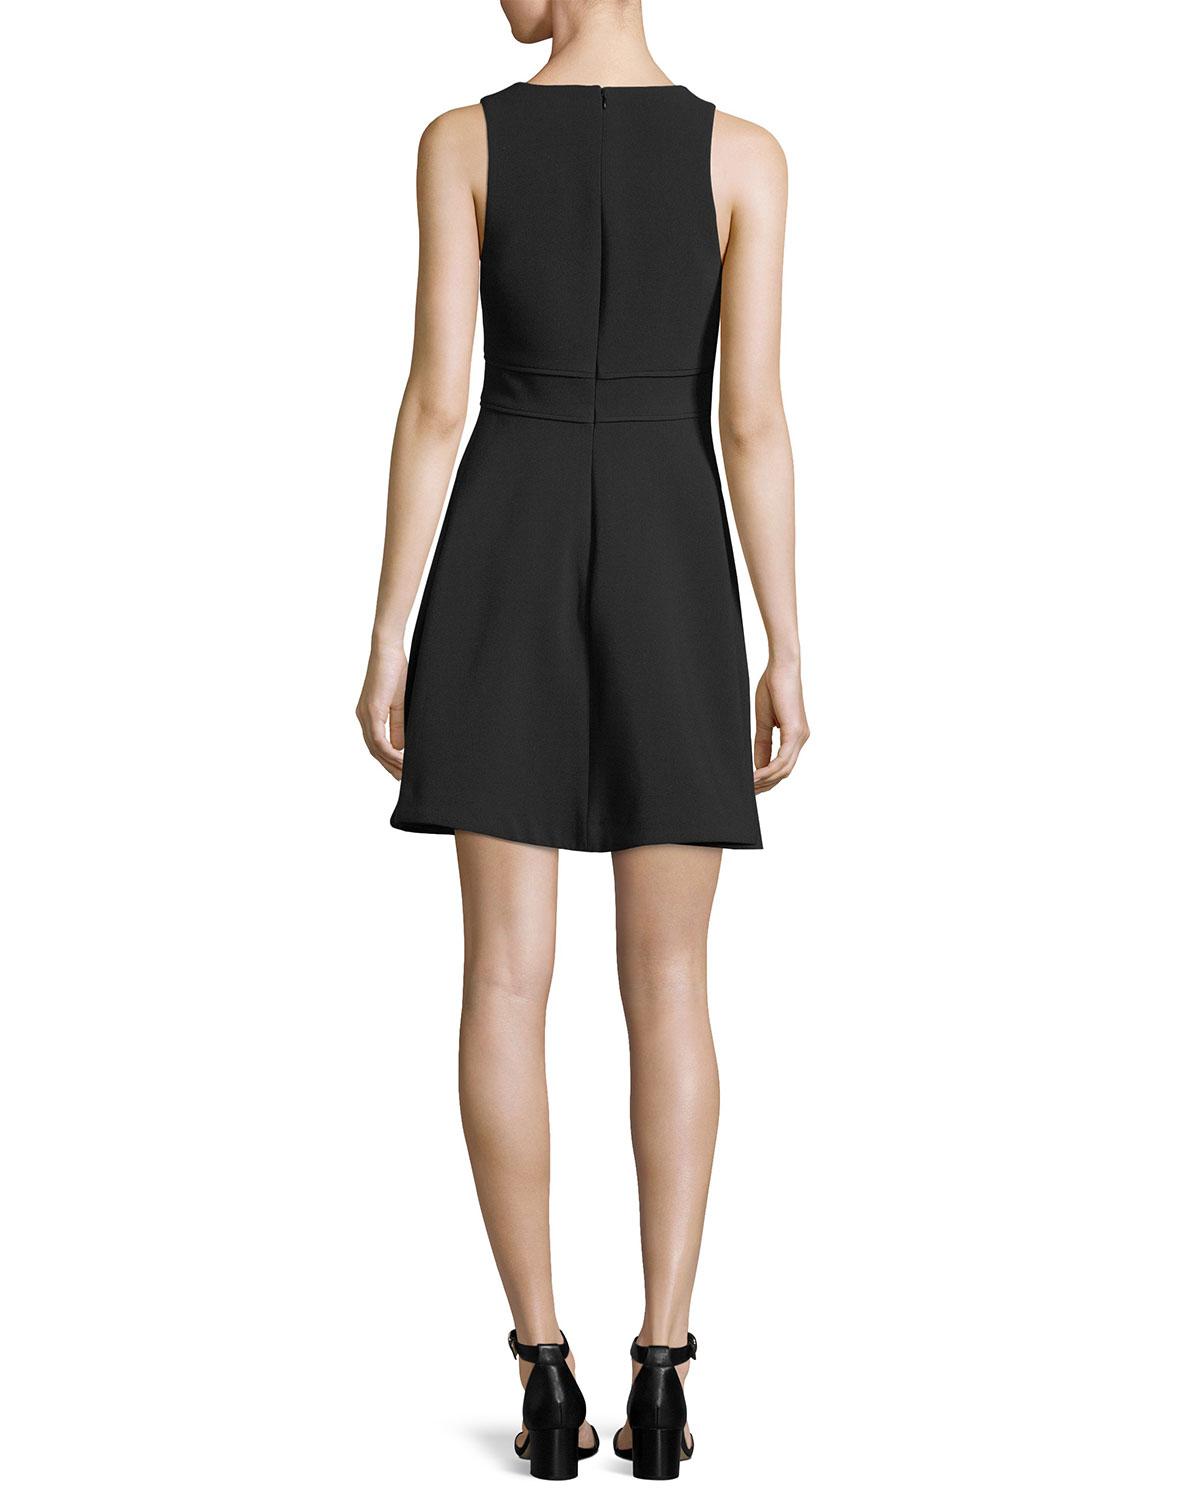 Lyst - Likely Bunker Sleeveless V-neck Fit-and-flare Cocktail Dress in ...